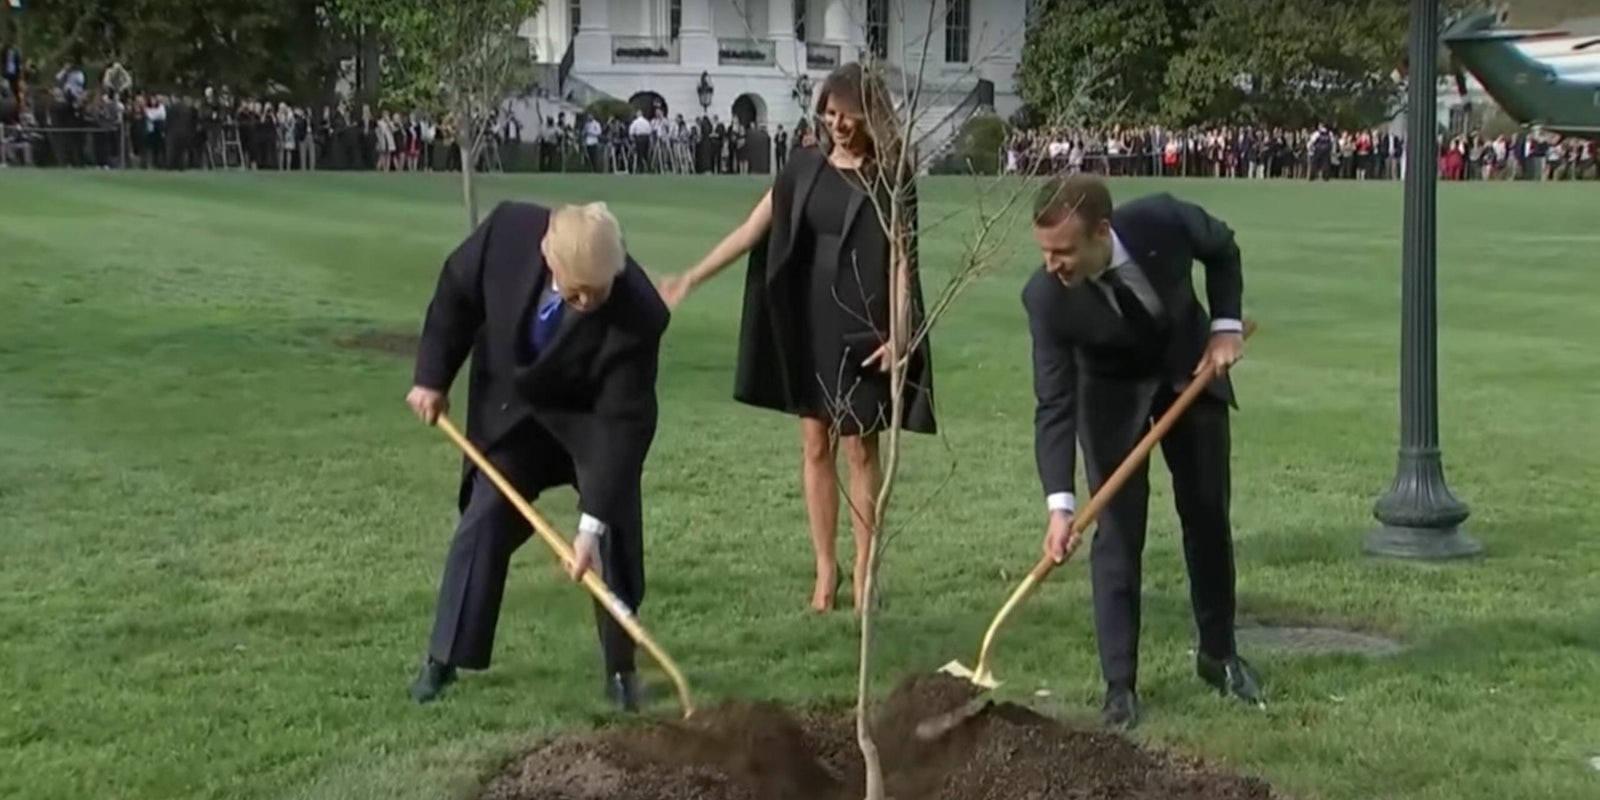 A photo of President Donald Trump and French President Emmanuel Macron shoveling dirt onto a tree quickly became a meme.